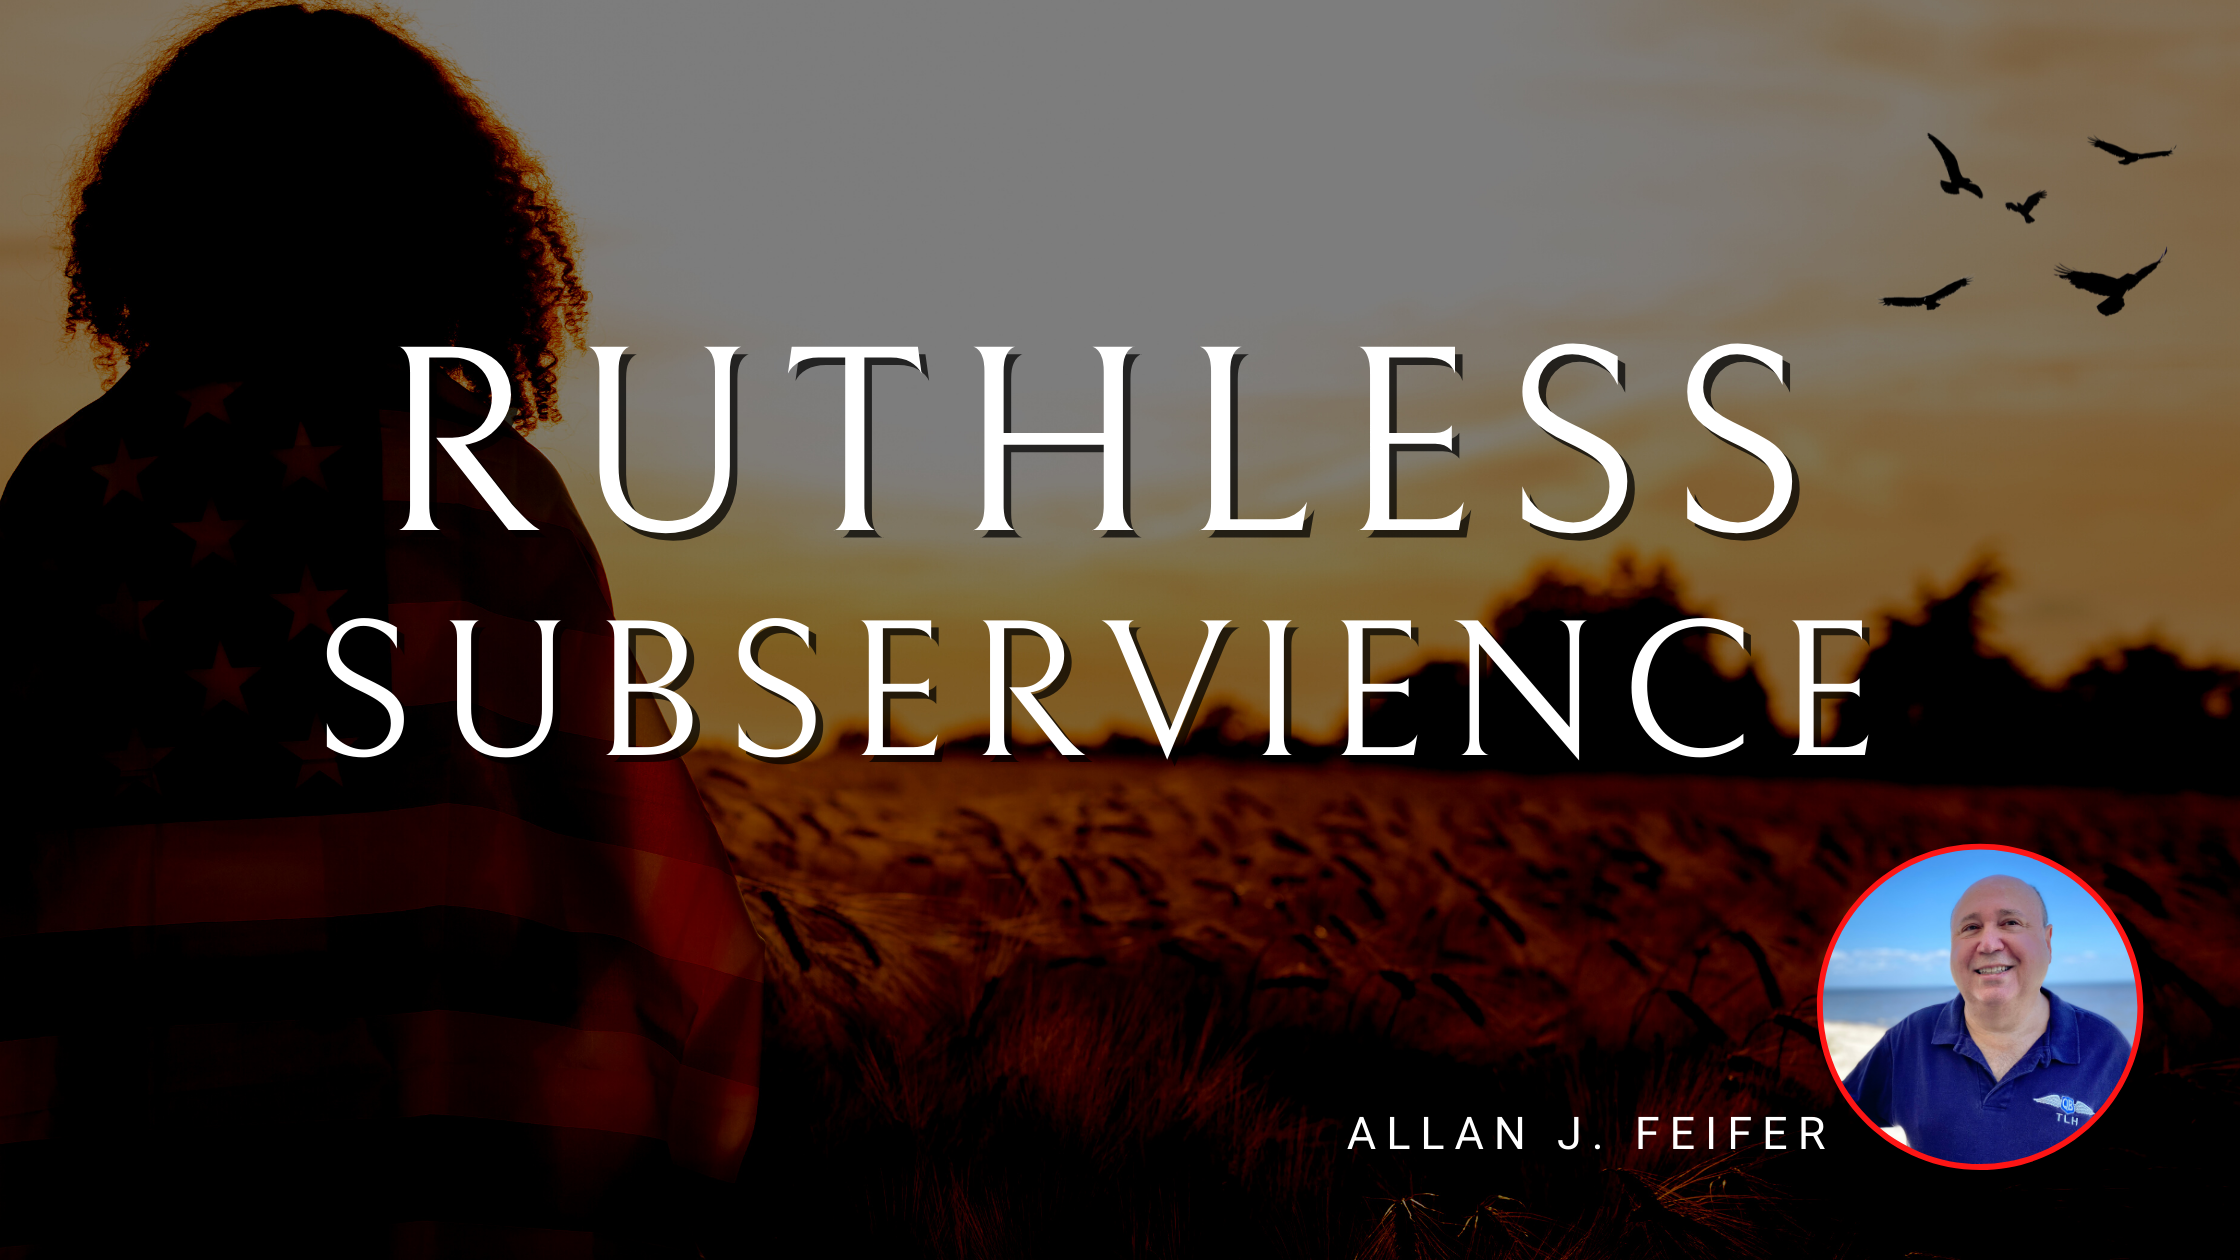 Ruthless Subservience